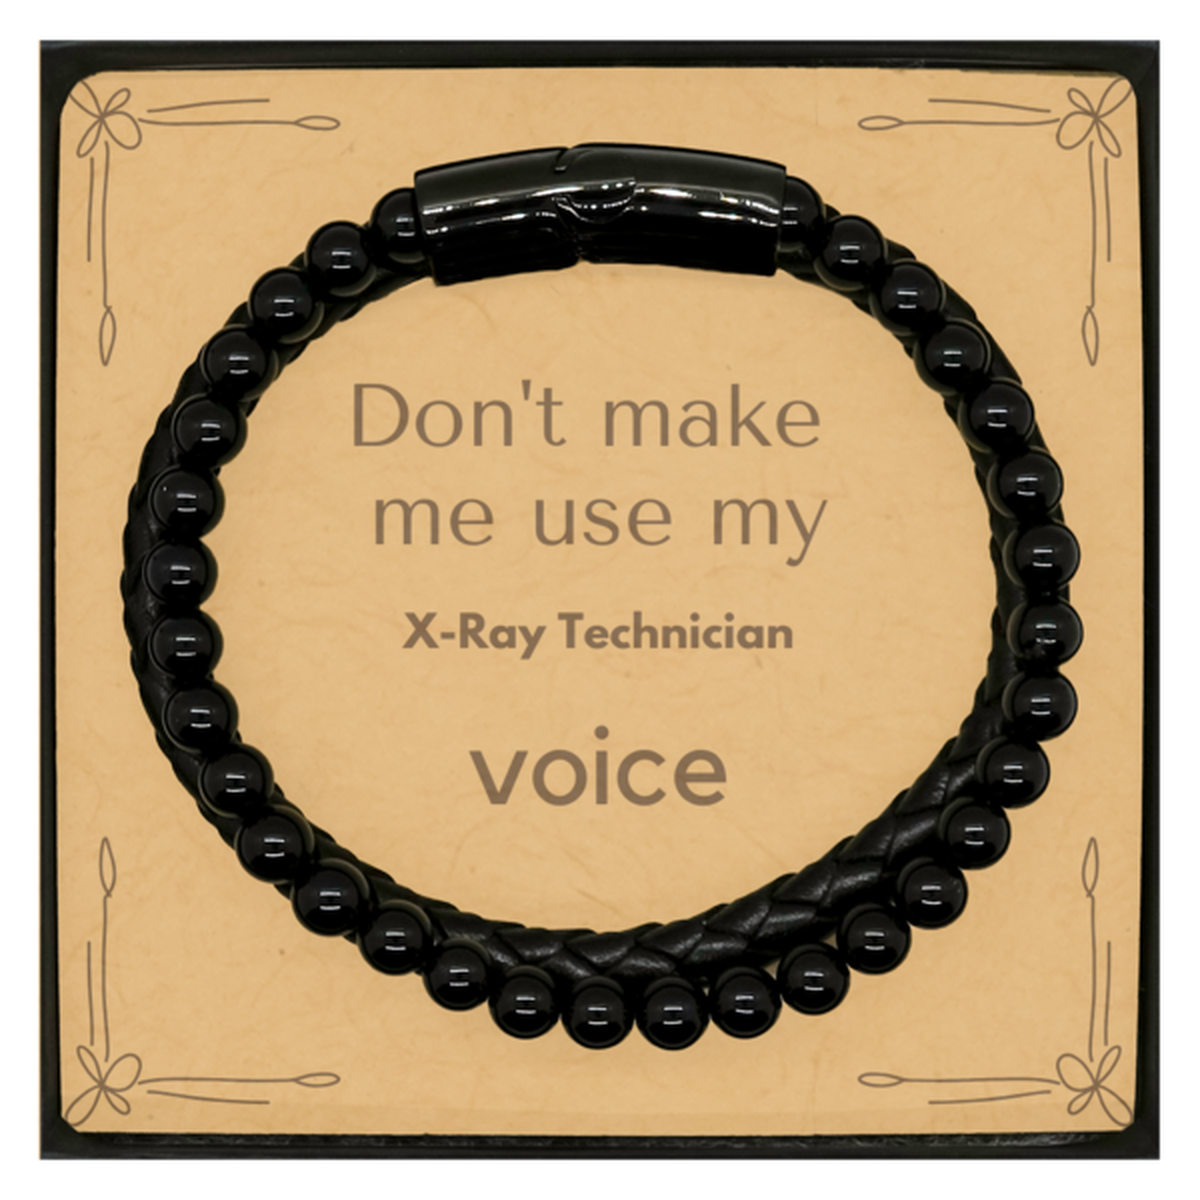 Don't make me use my X-Ray Technician voice, Sarcasm X-Ray Technician Card Gifts, Christmas X-Ray Technician Stone Leather Bracelets Birthday Unique Gifts For X-Ray Technician Coworkers, Men, Women, Colleague, Friends